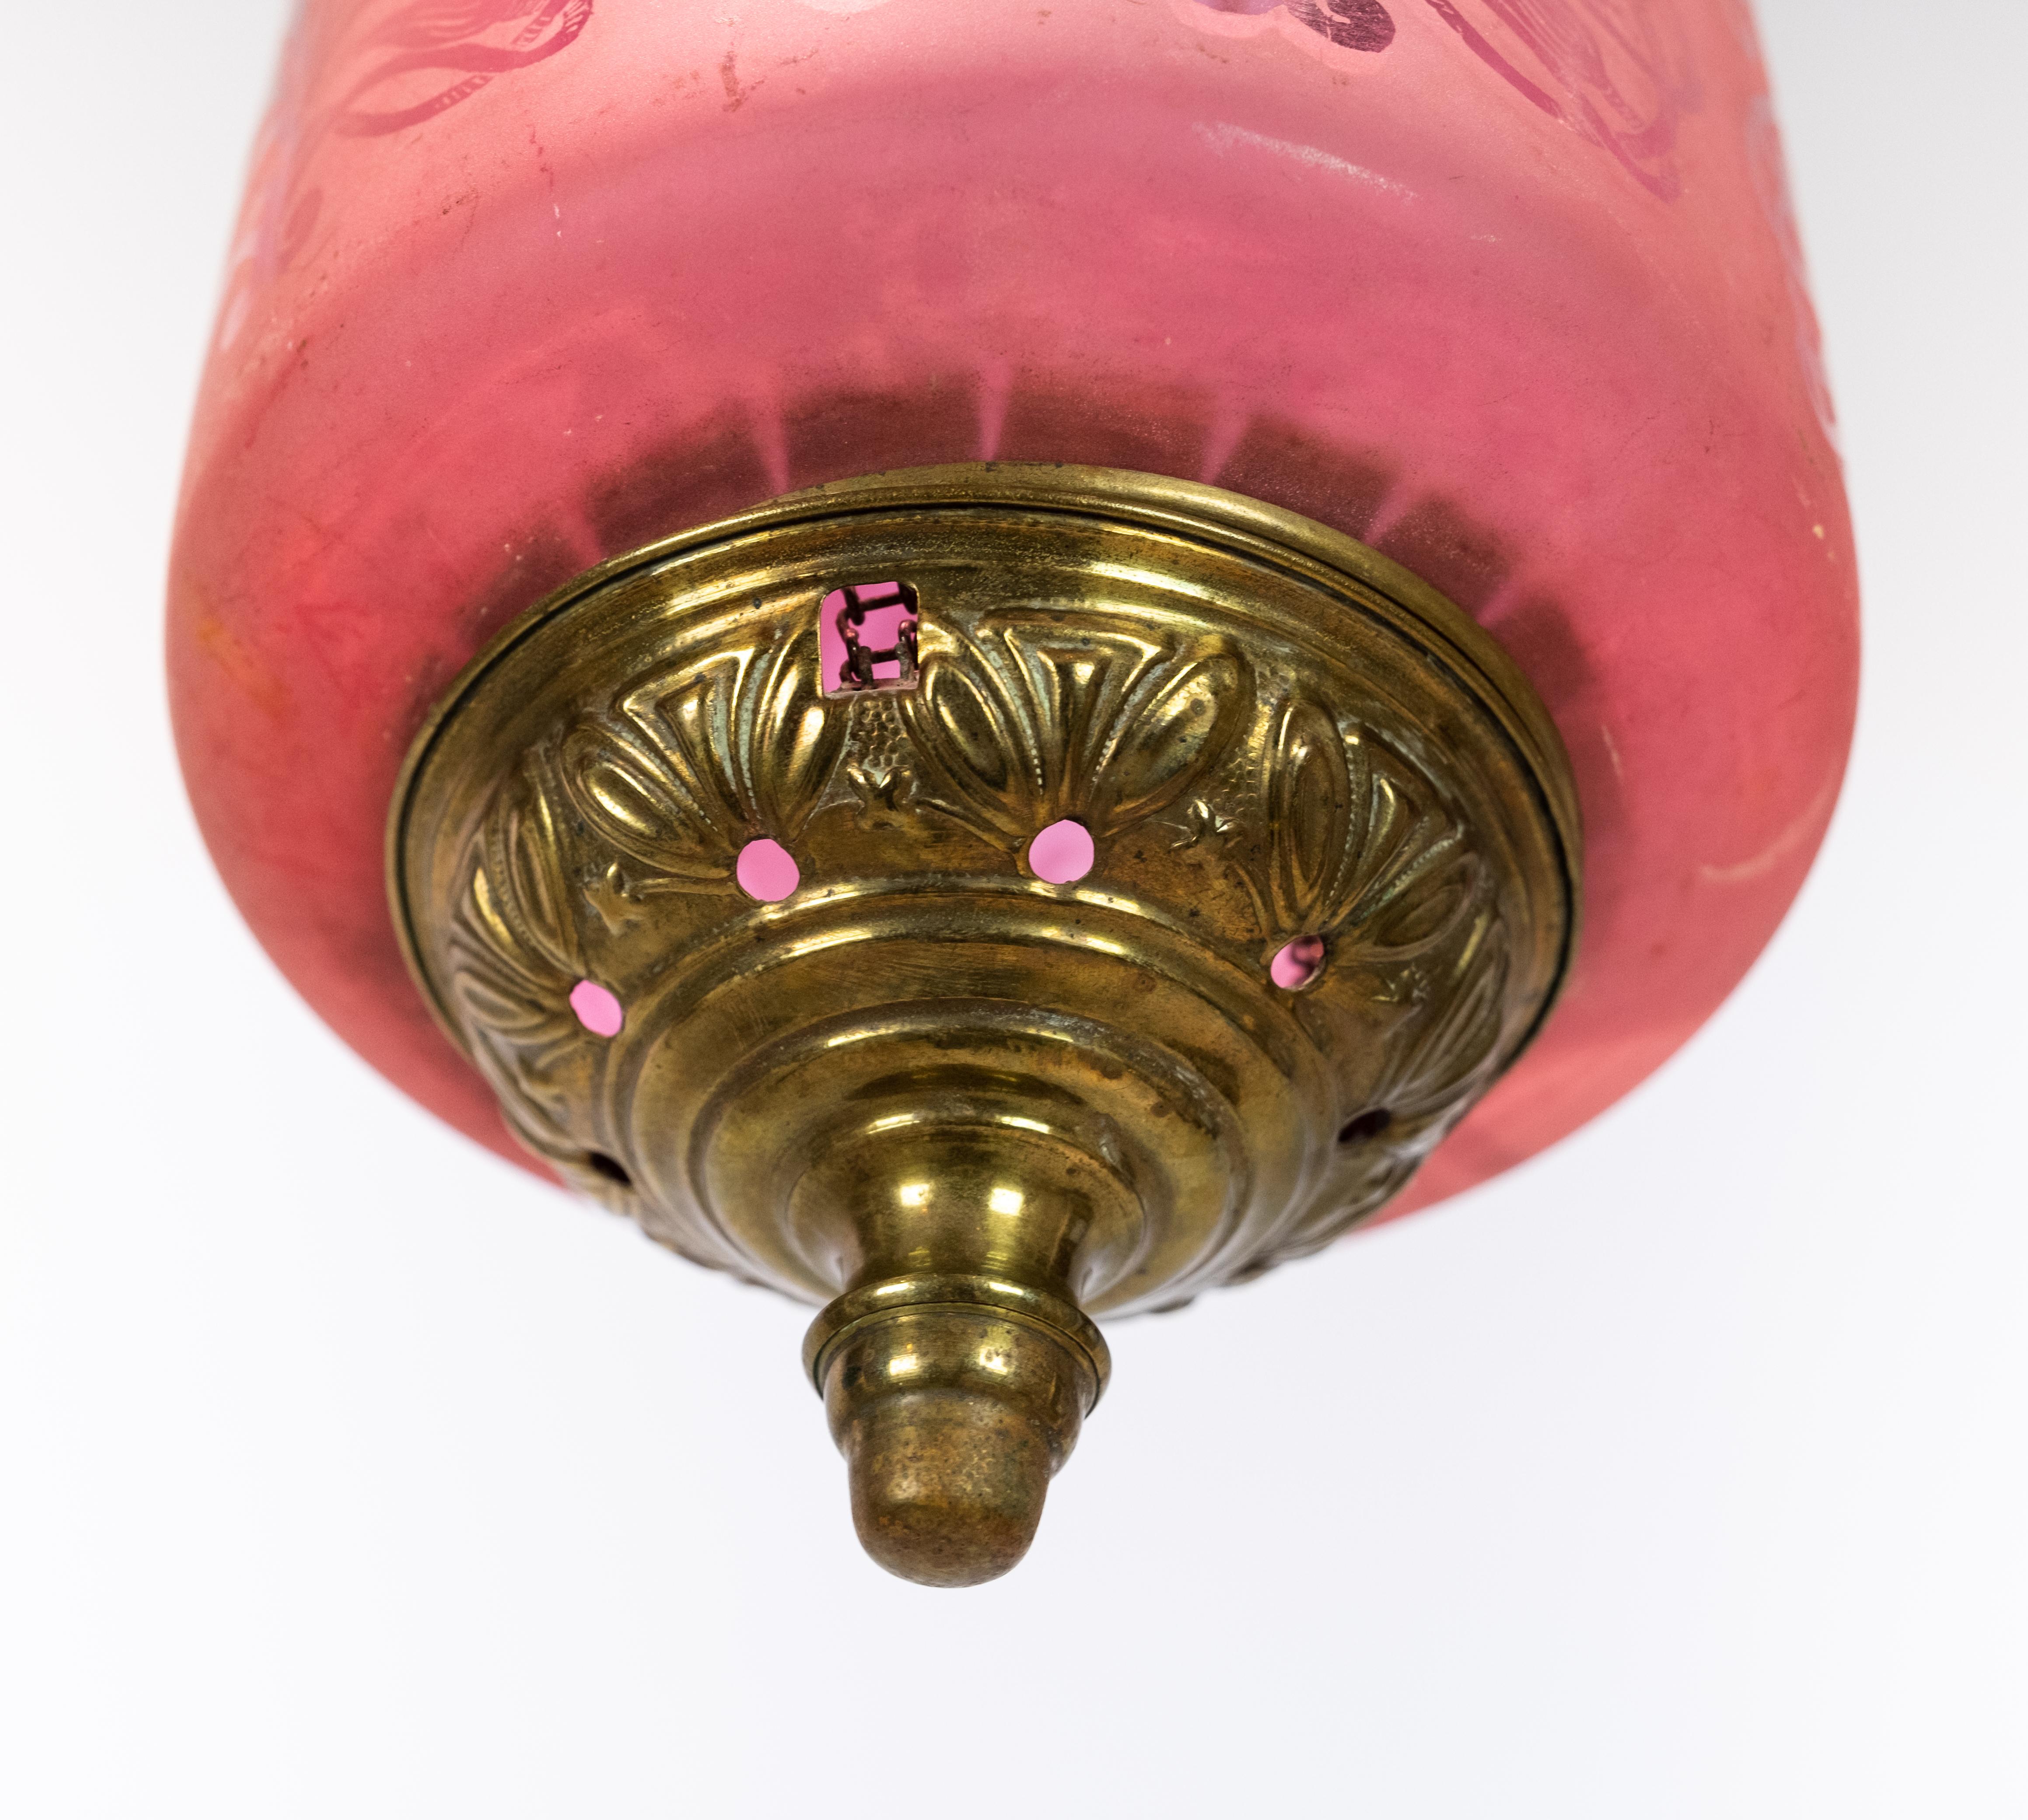 Other Antique Pendant of Pink Opaline Glass with Brass Edge and Suspension, 1860s